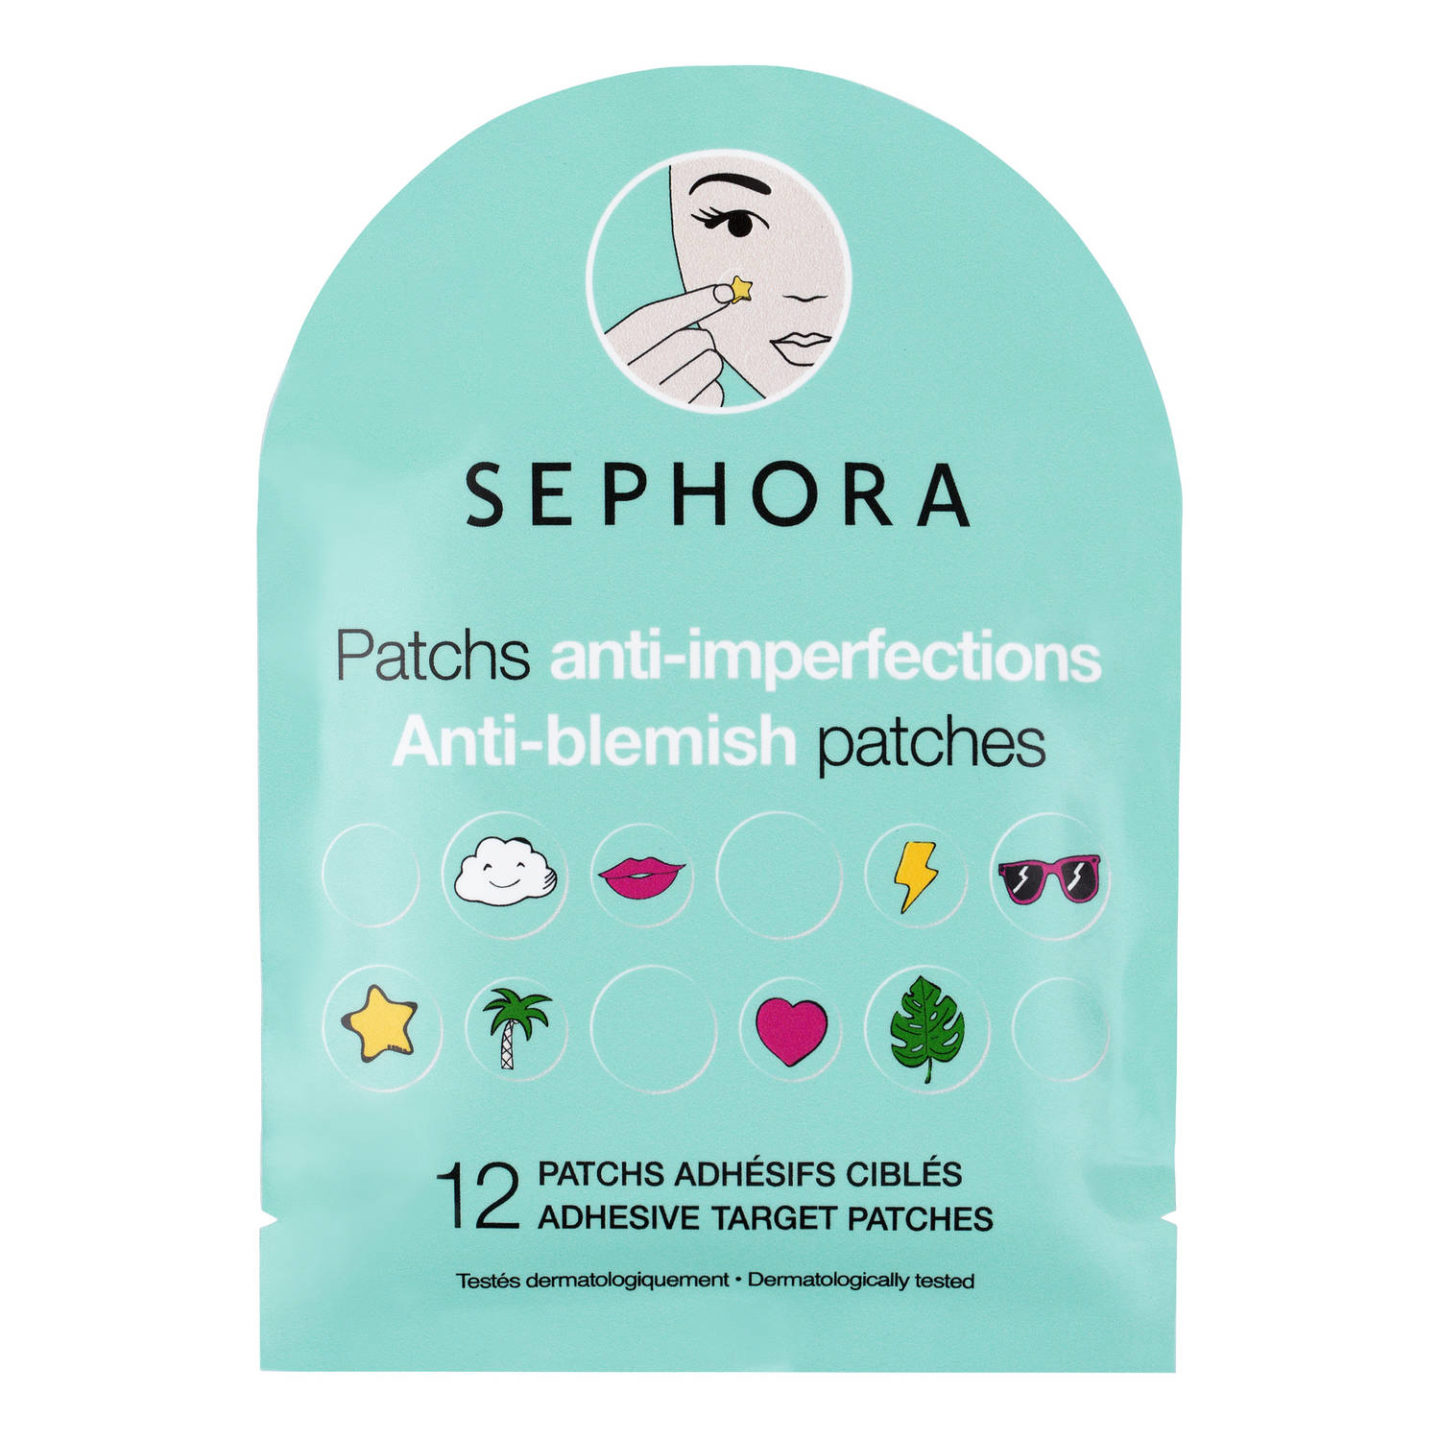 patchs anti imperfections sephora